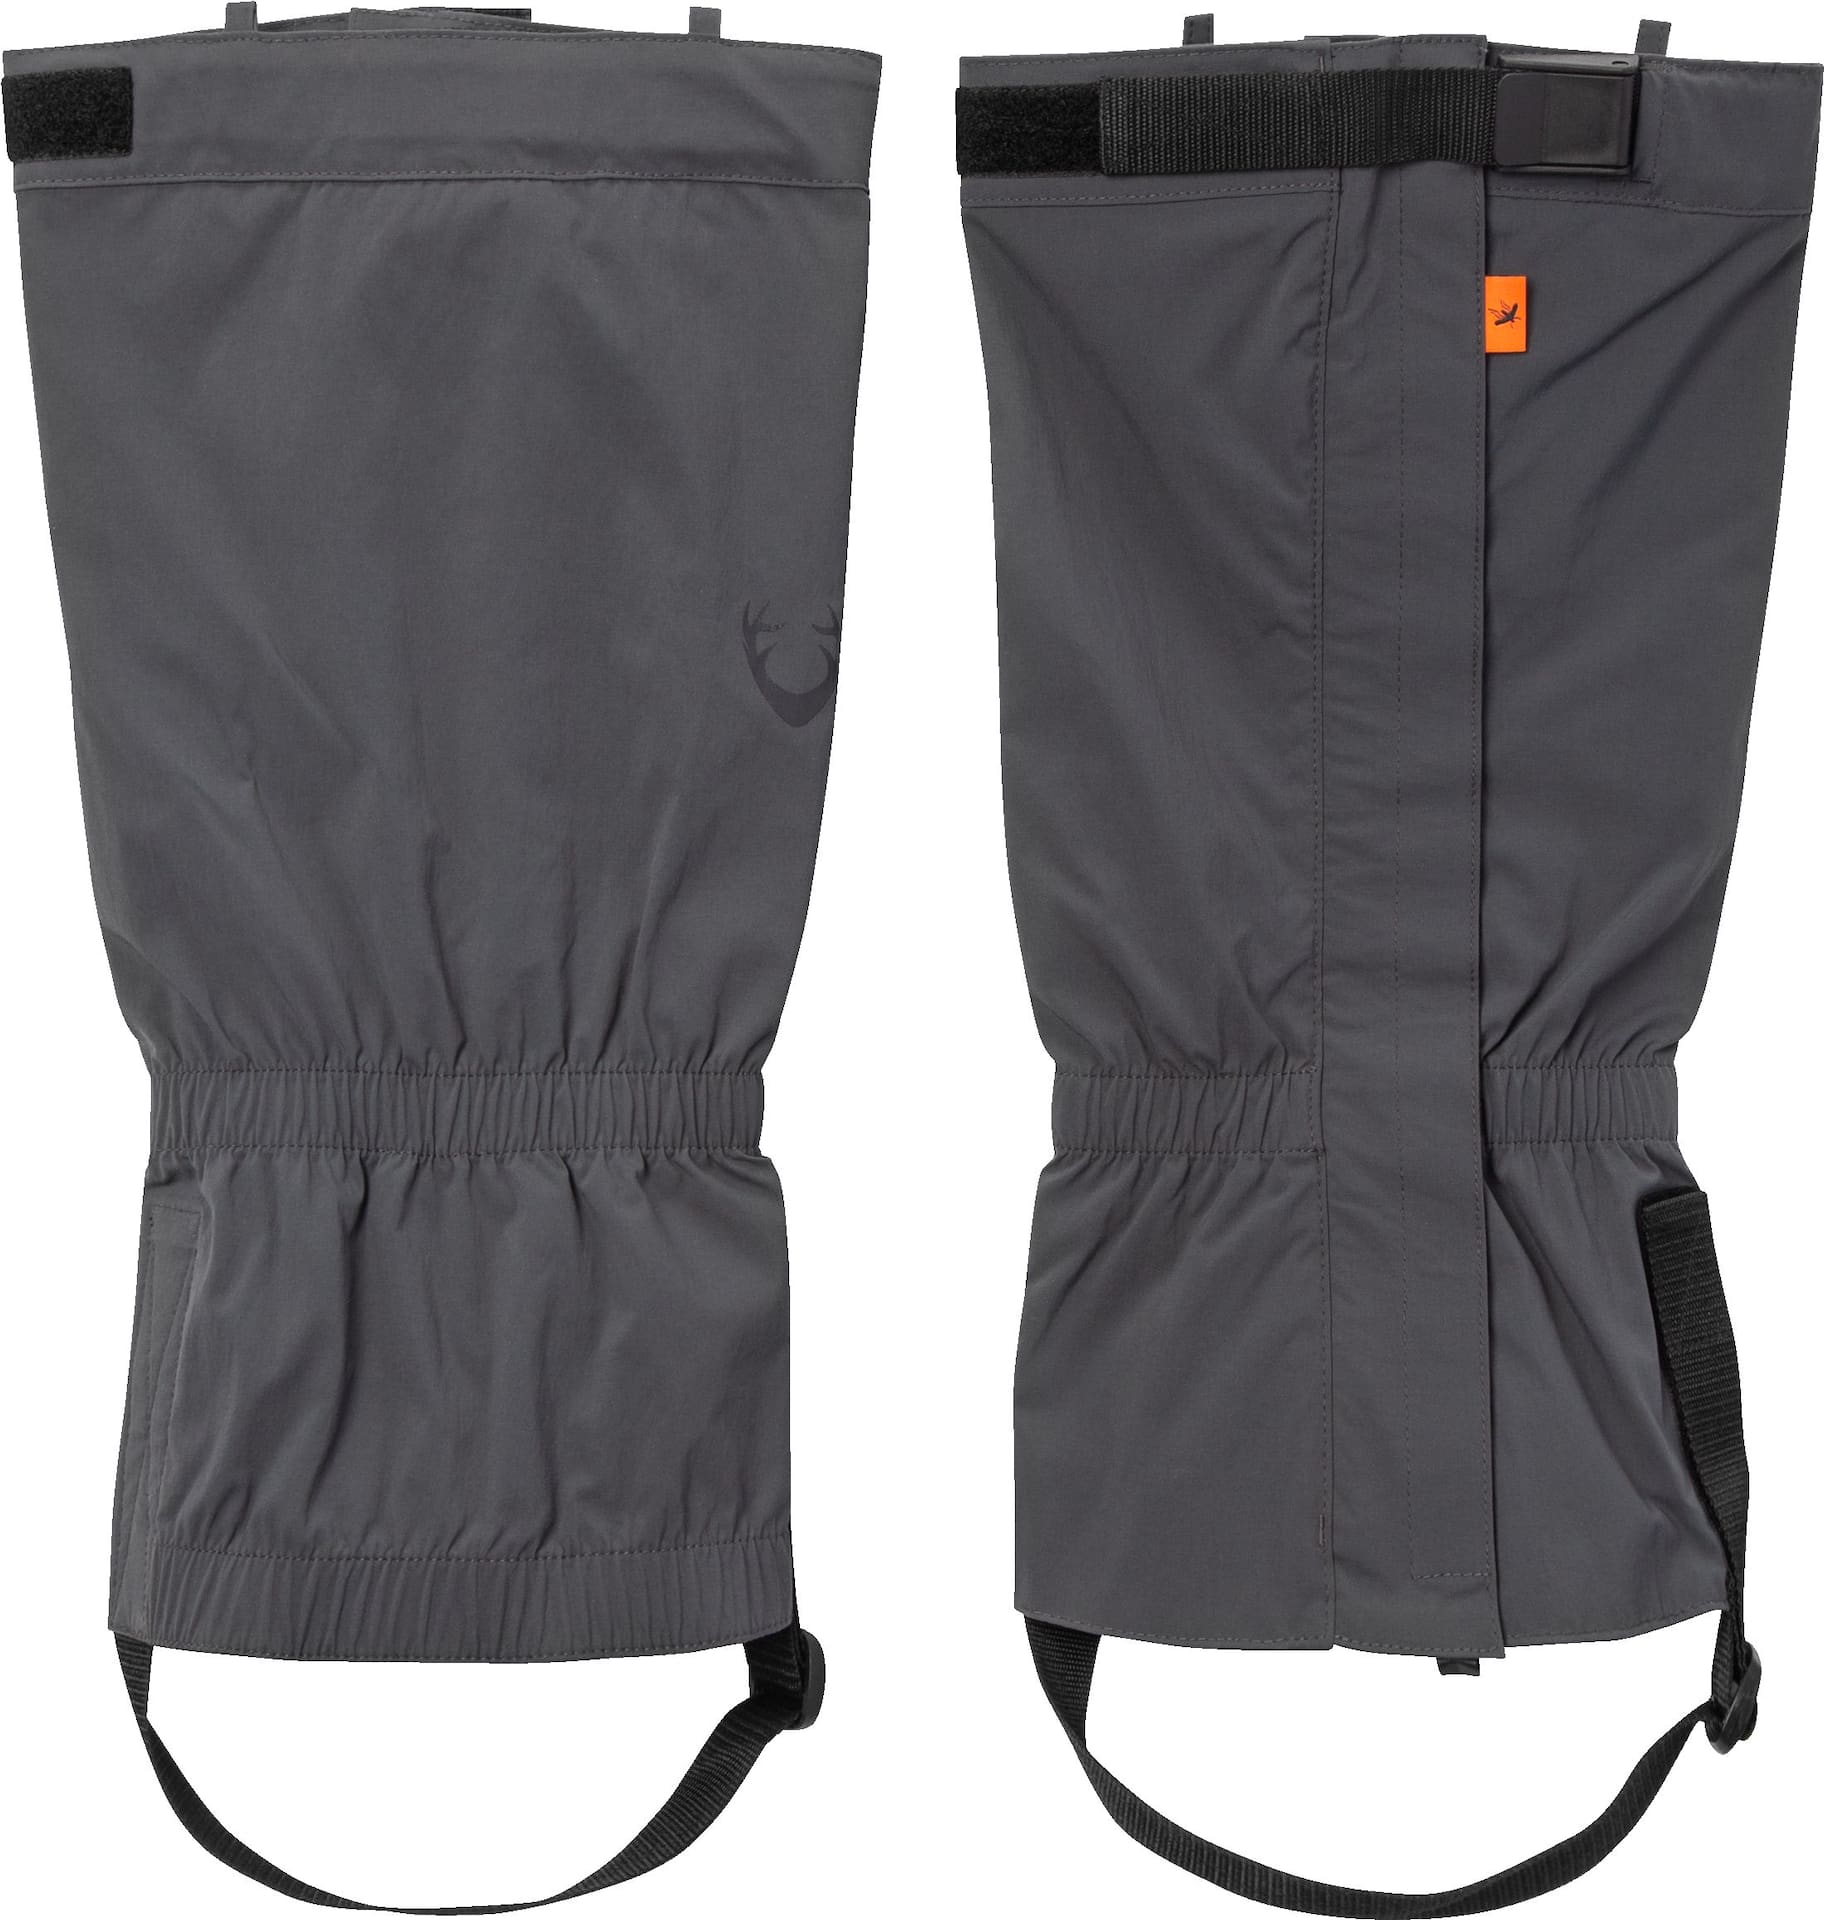 https://media-www.canadiantire.ca/product/playing/hunting/hunting-apparel-footwear/3751420/mckay-no-fly-zone-gaiters-l-xl-grey-176157f2-d9d5-495f-84bb-50f778af40aa-jpgrendition.jpg